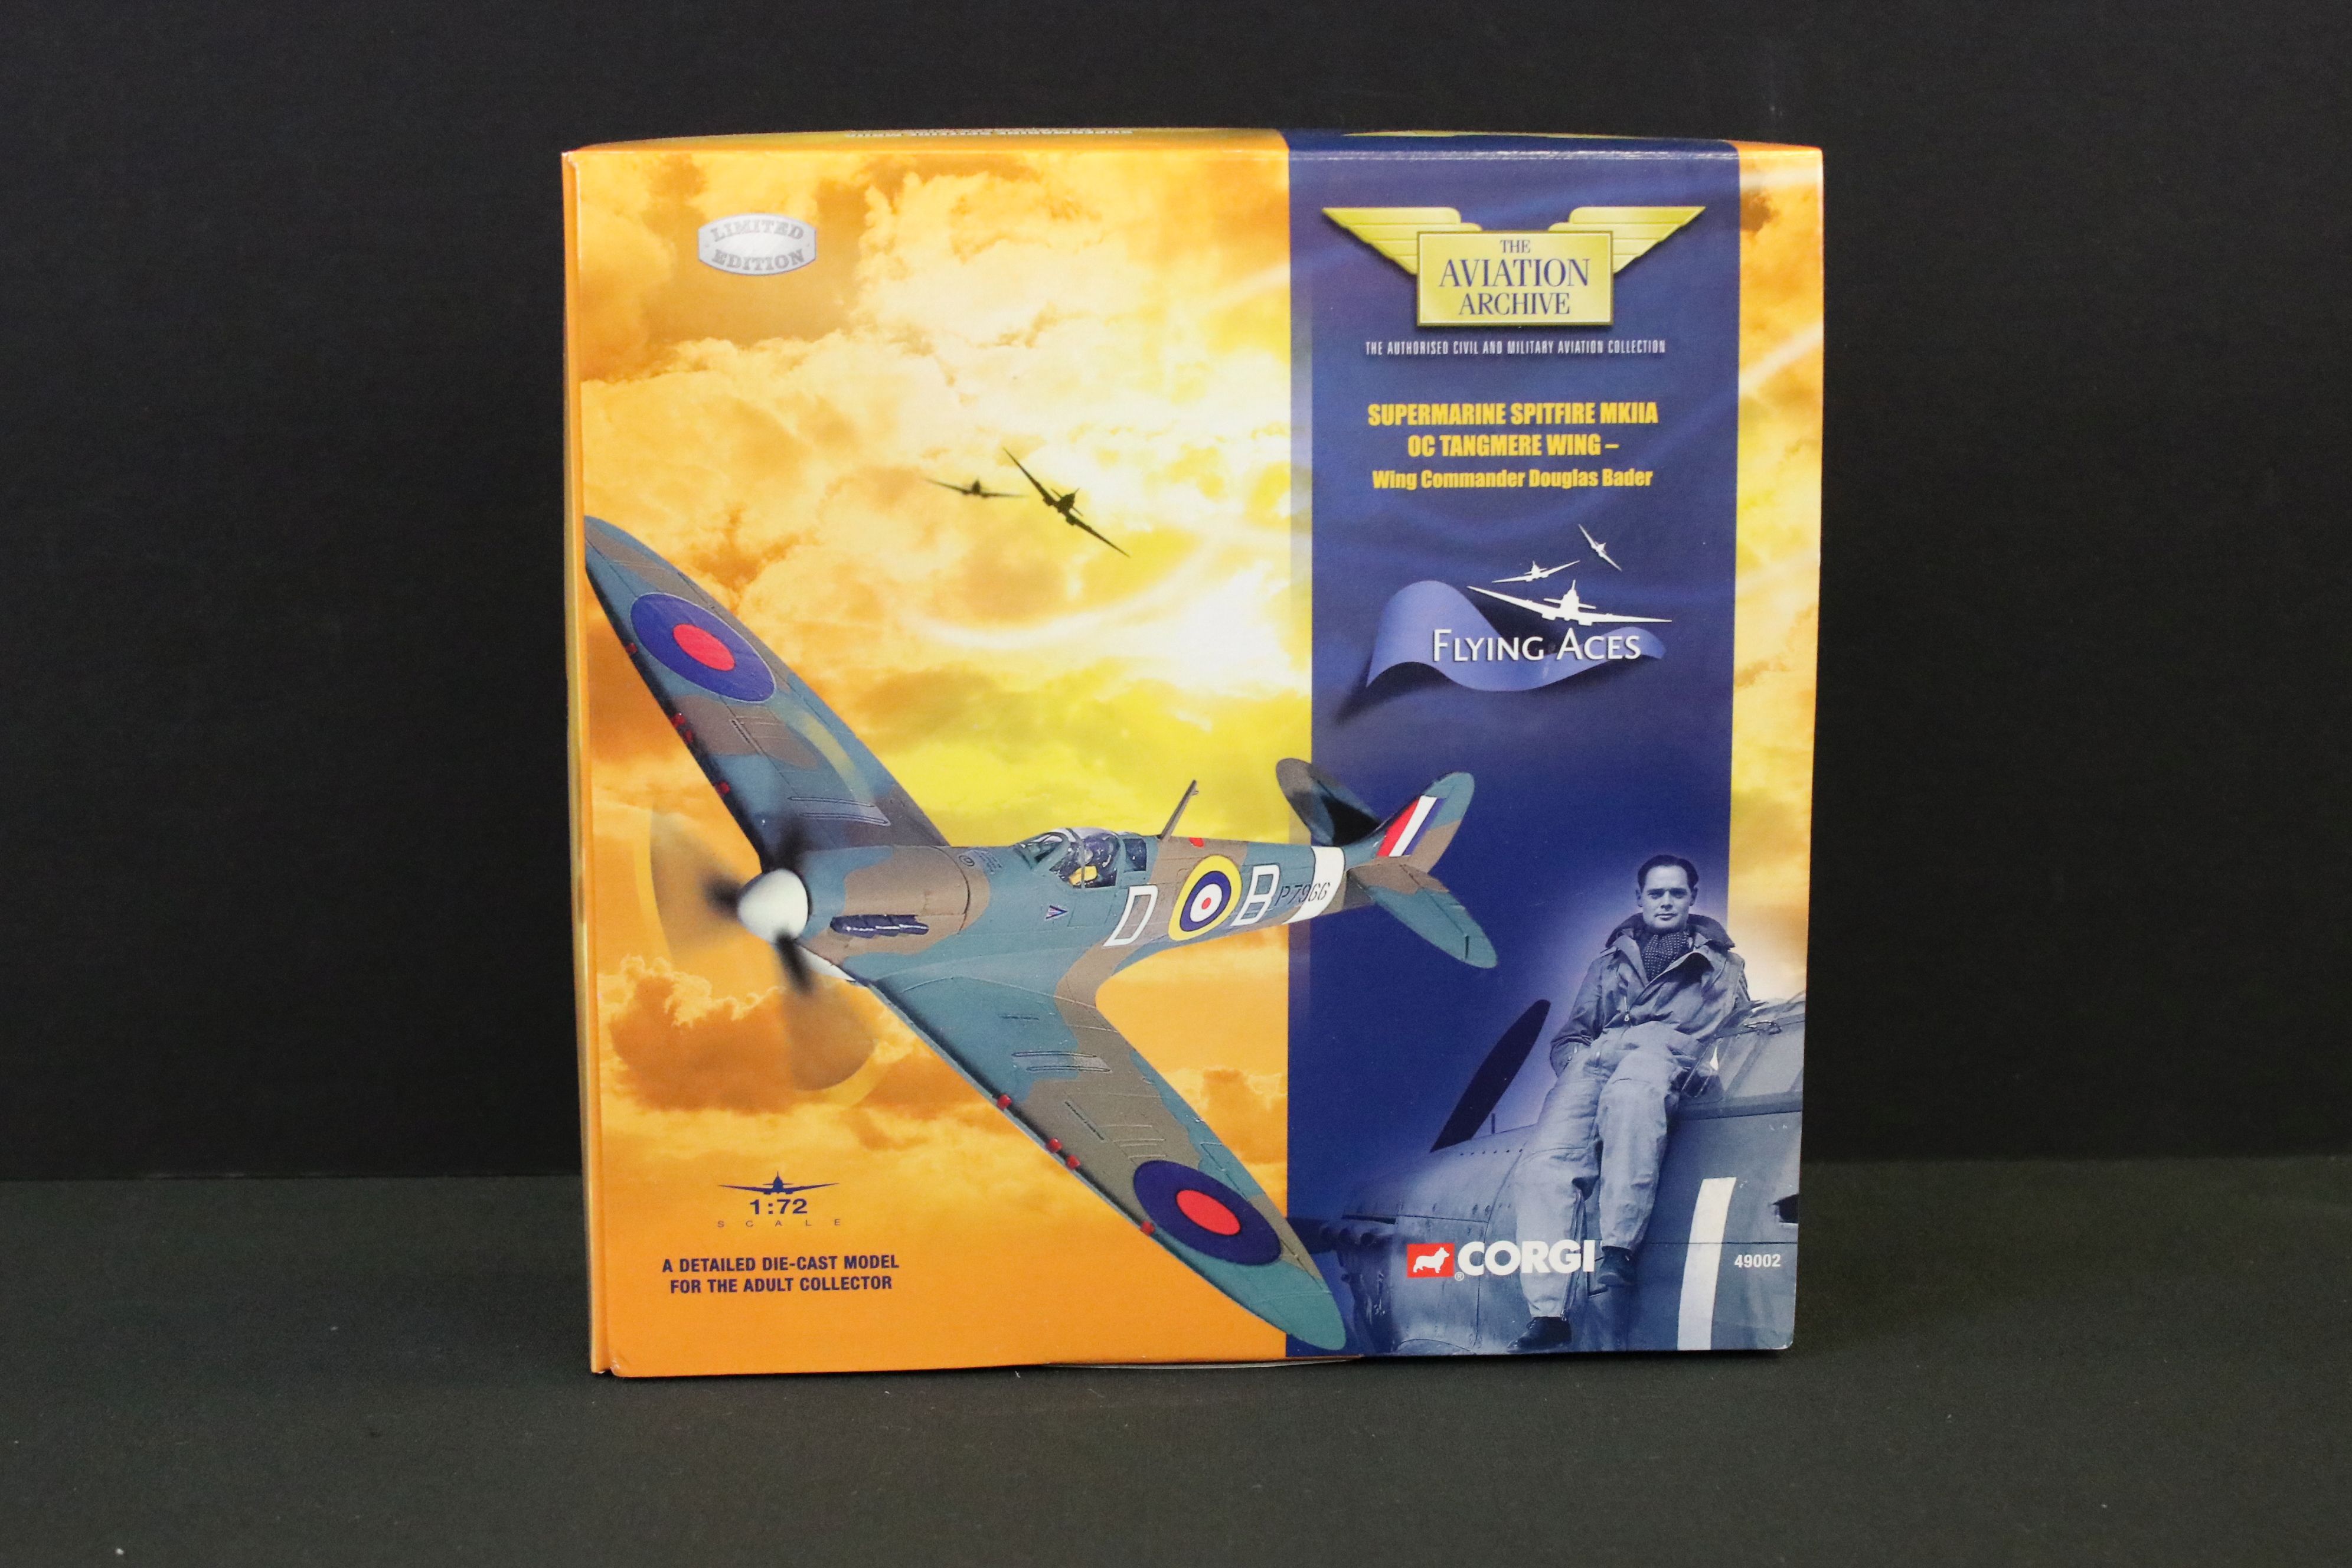 11 Boxed diecast model planes to include 5 x Corgi Aviation Archive (49202 1:72 Flying Aces - Image 22 of 35